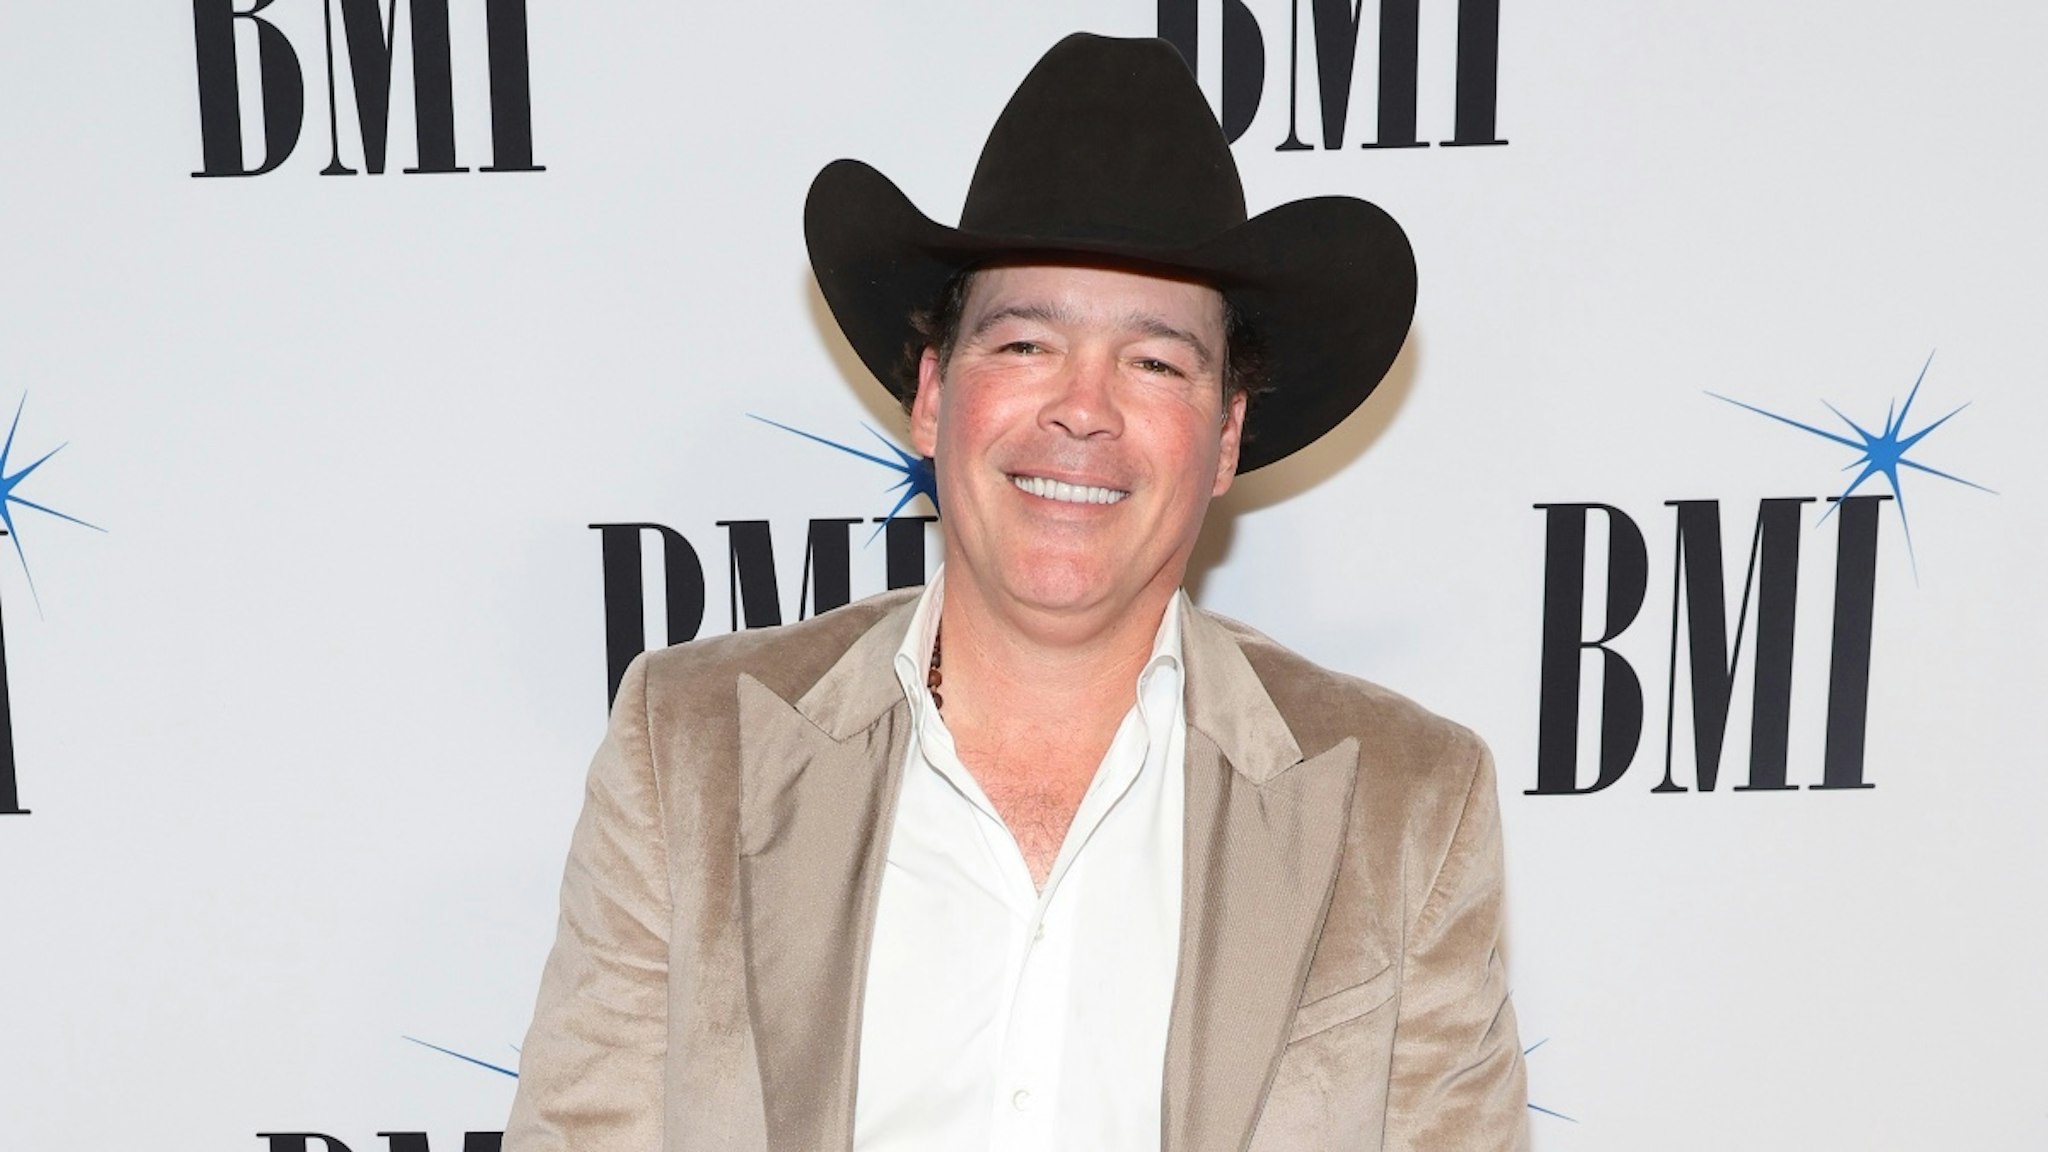 Clay Walker attends the 2022 BMI Country Awards at BMI on November 08, 2022 in Nashville, Tennessee.